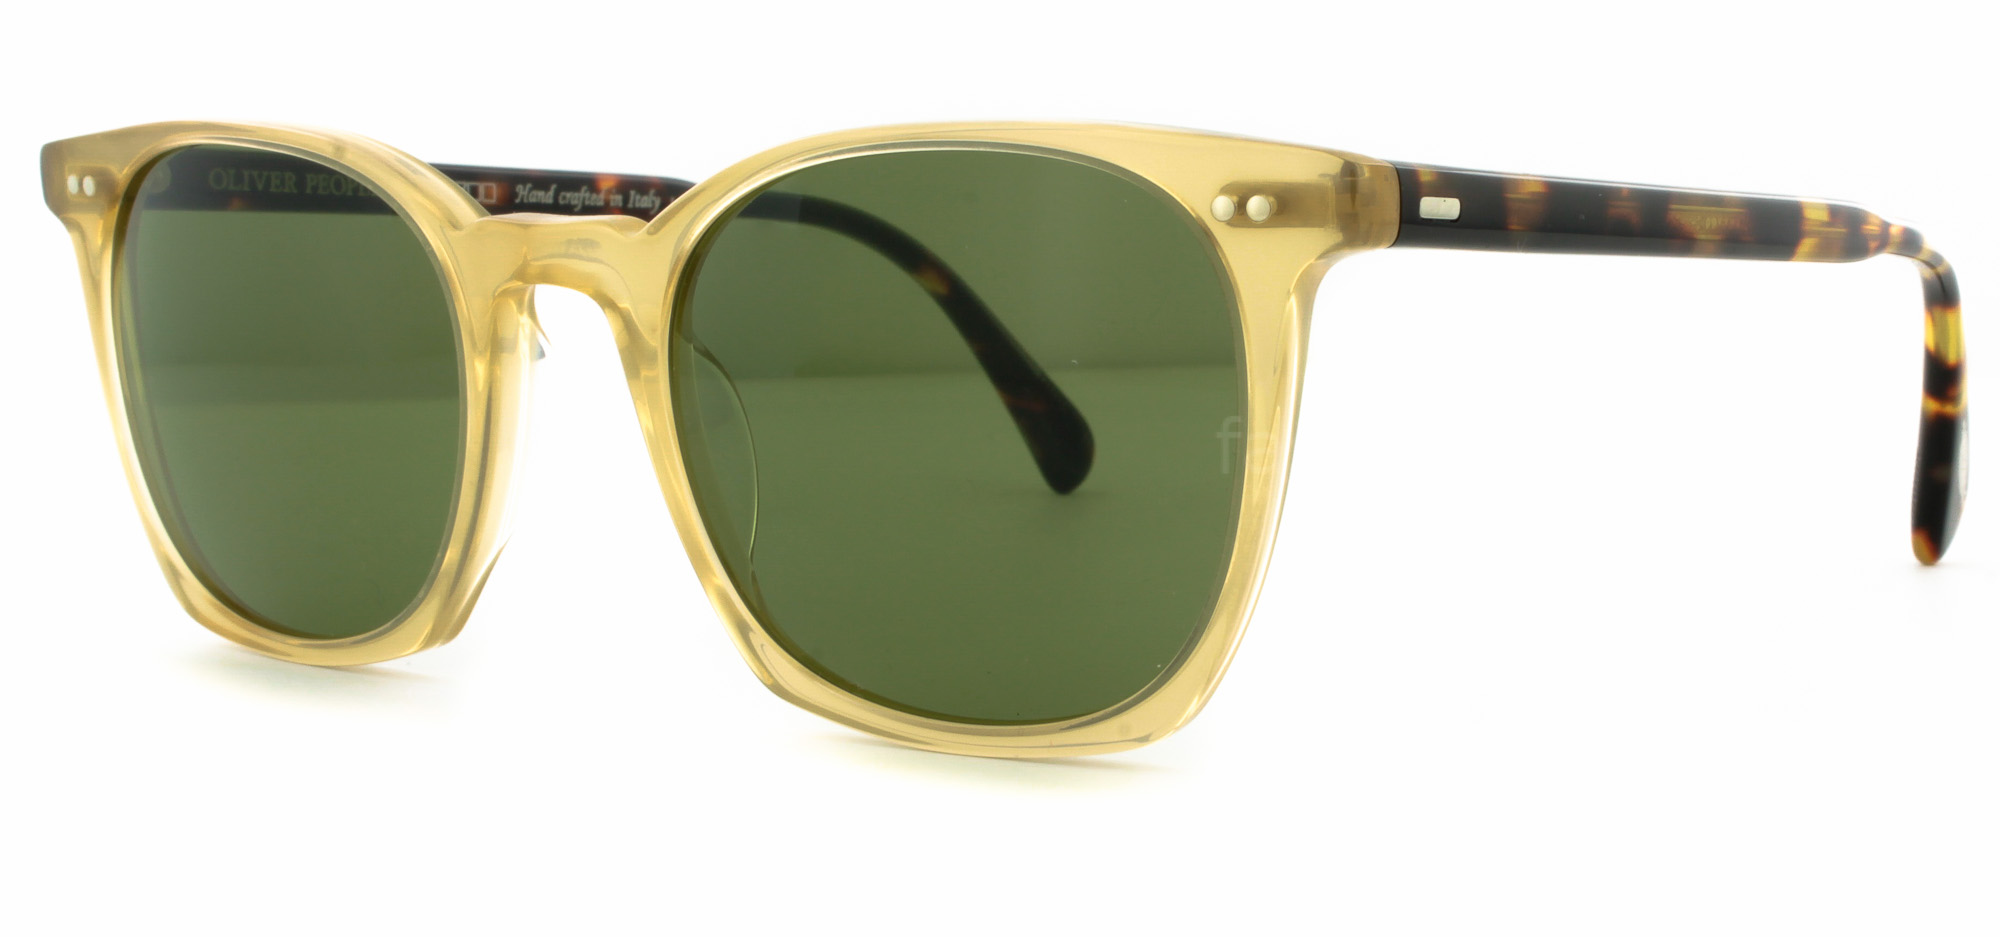 OLIVER PEOPLES L.A COEN SUN